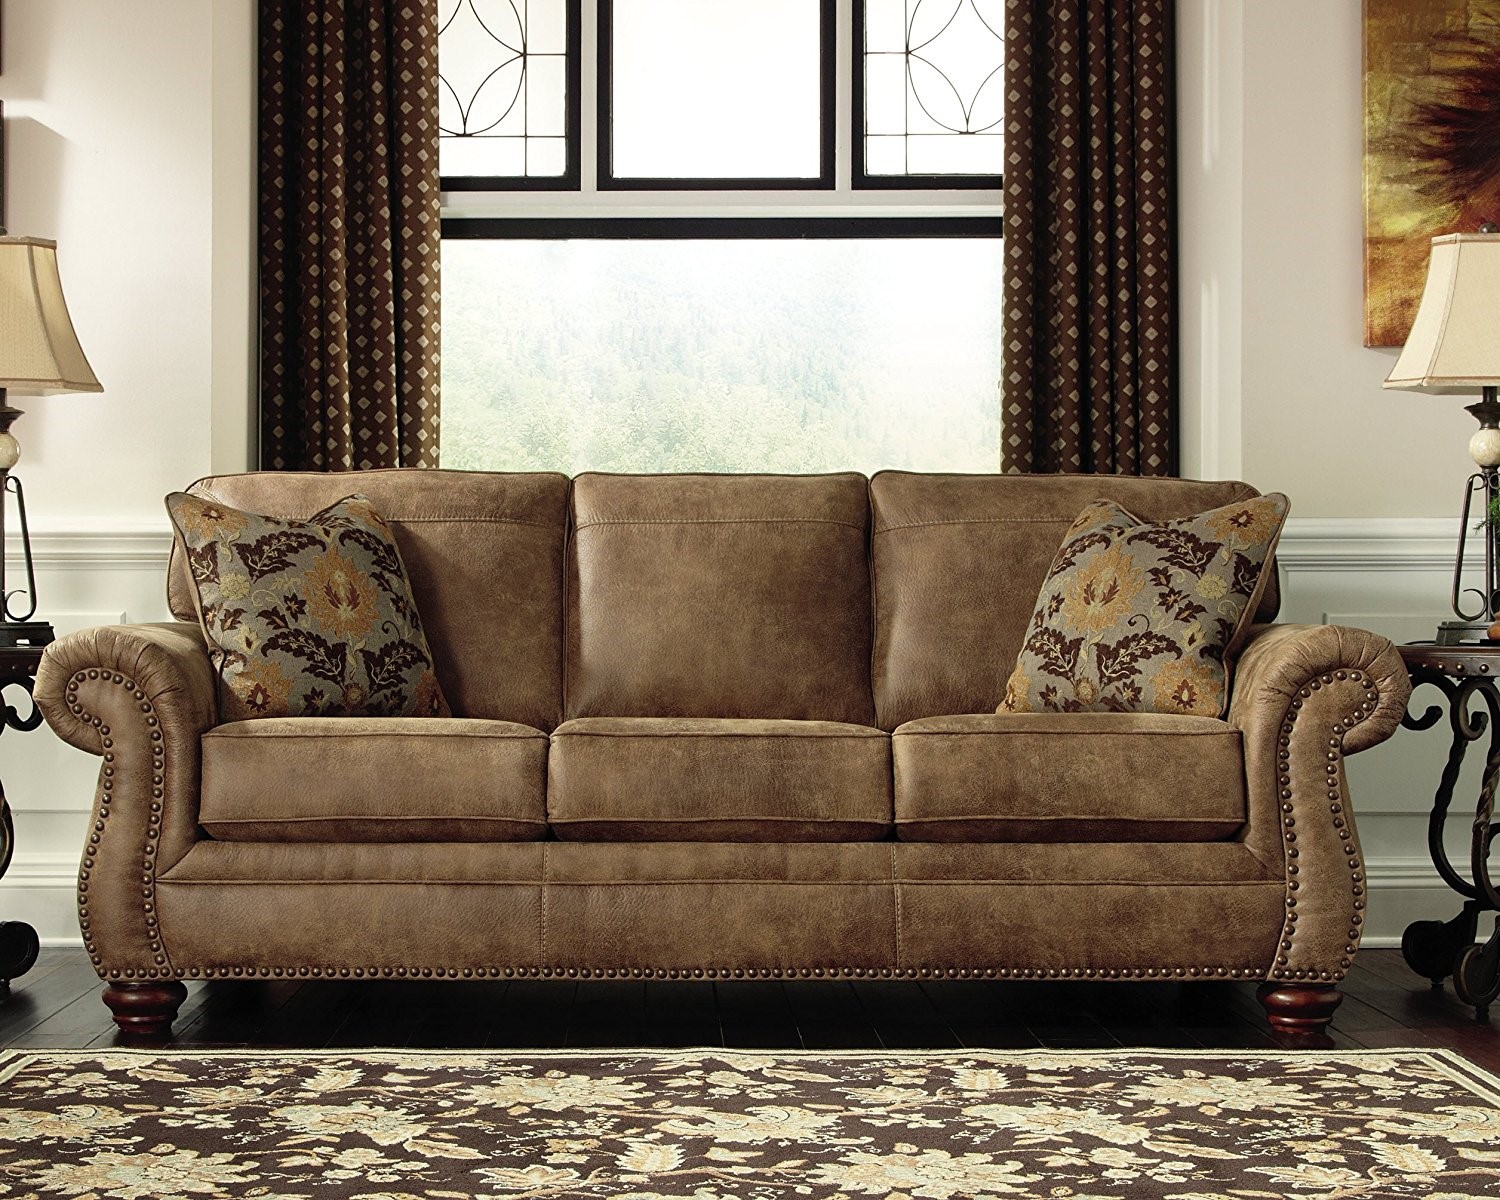 ashley furniture sofa bed with ottoman